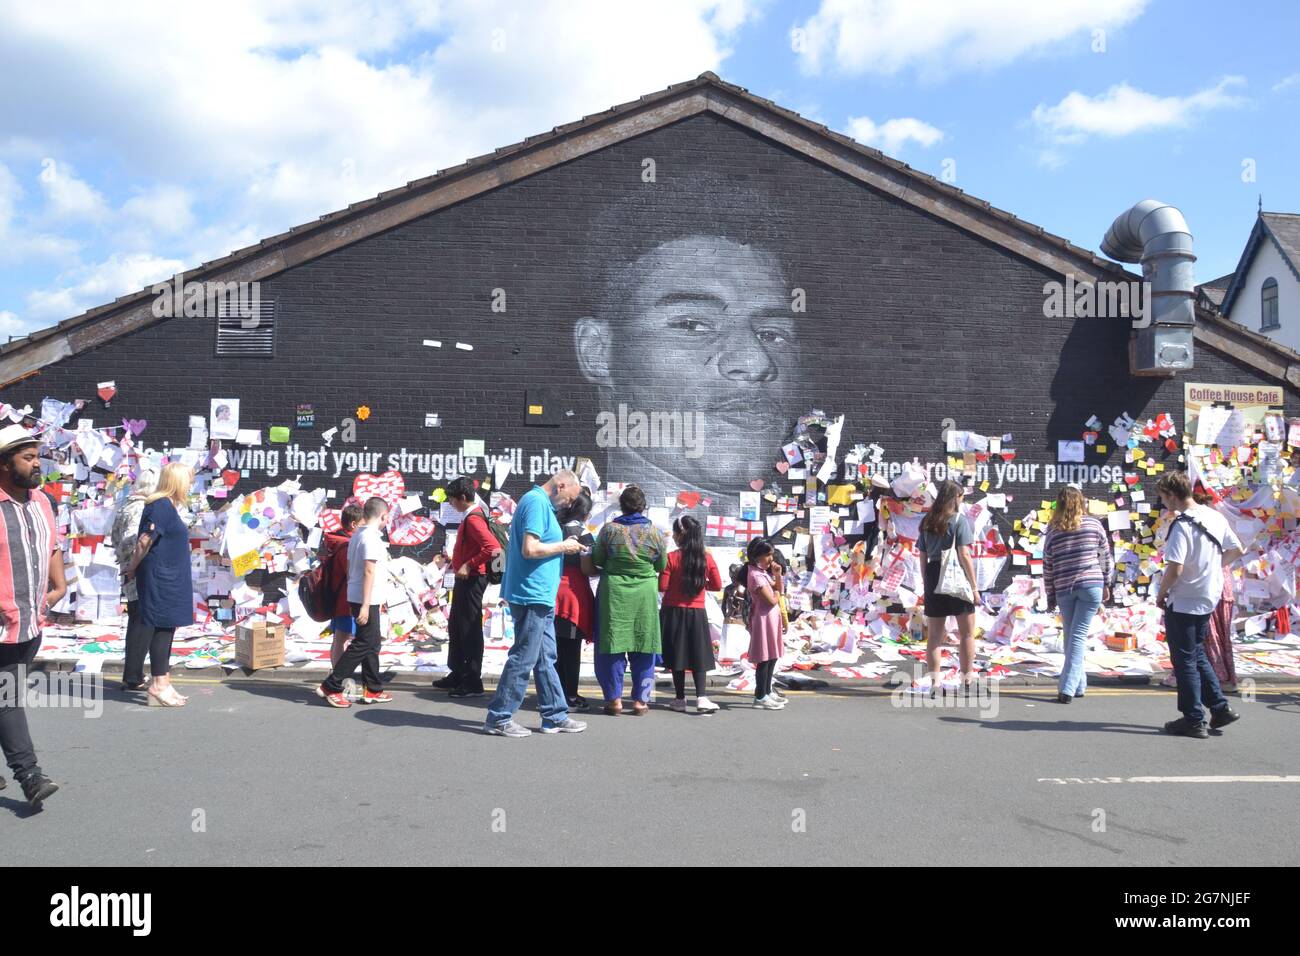 People leave flowers and hundreds of supportive notes, pictures, flags and anti racist messages on the giant  Manchester United player  Marcus Rashford mural in Withington, Manchester, England, United Kingdom, that was vandalised  with abusive graffiti after England's Euro2020 football loss on July 11th, 2021. The mural was created by French-born street artist Akse P19 on the wall of the Coffee House Cafe on Copson Street. Marcus Rashford is a Manchester United football player. Akse fully repaired the damaged mural by 13th July, 2021. Stock Photo